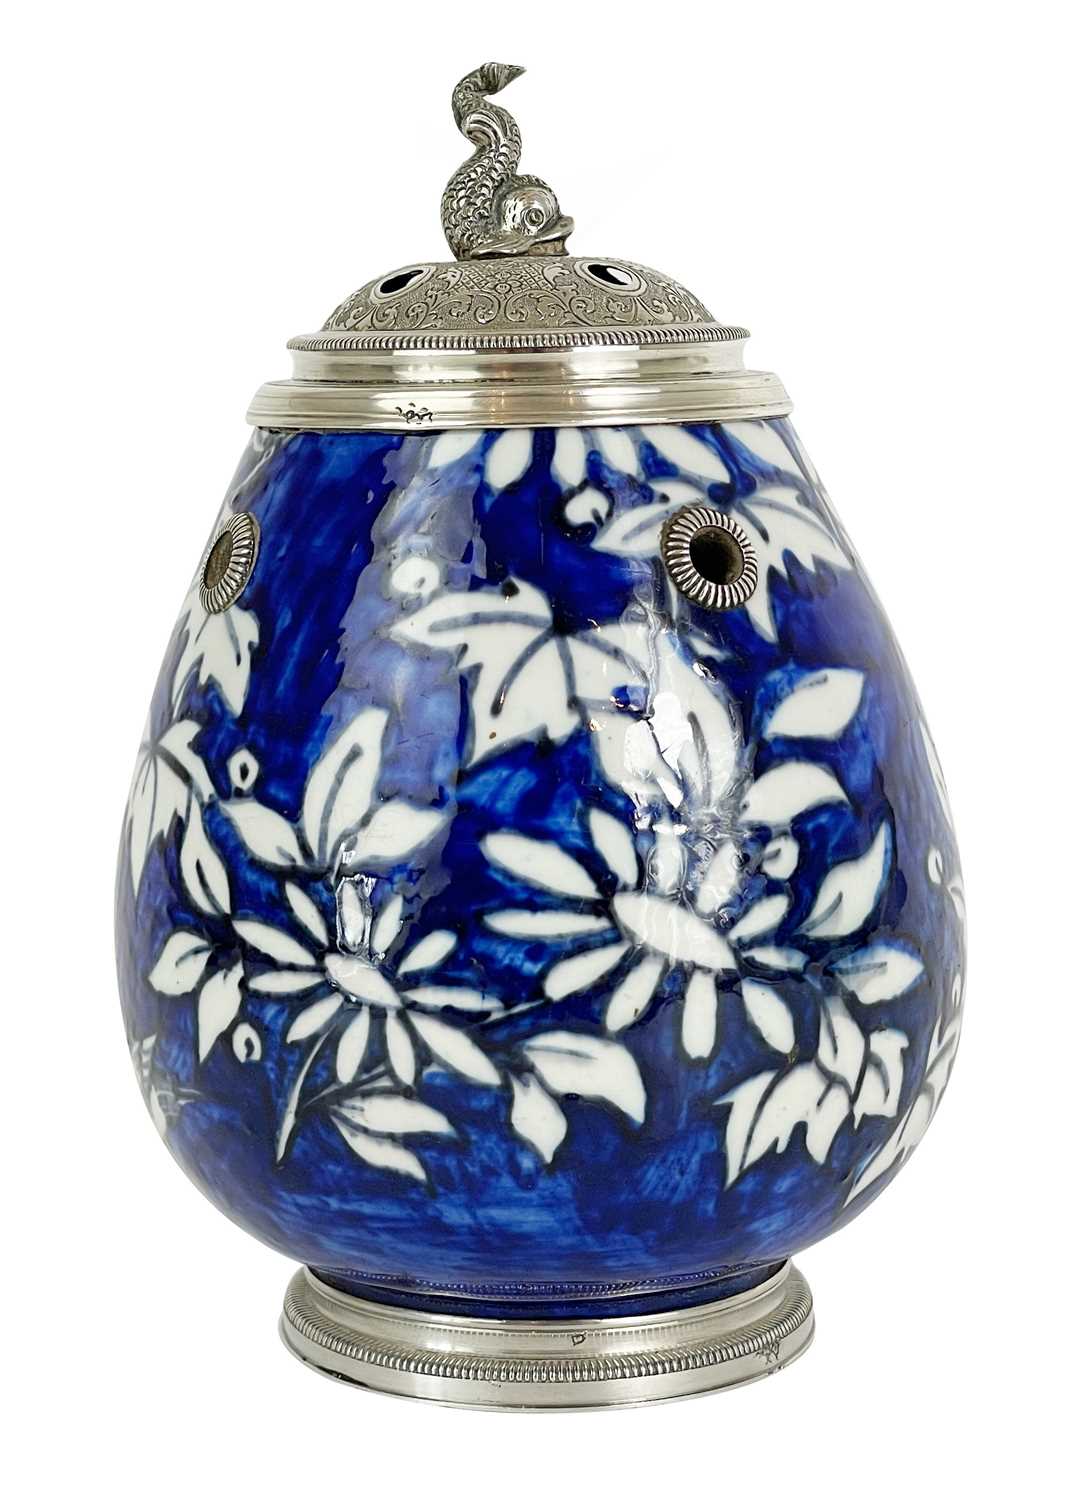 A Persian pottery and silver mounted pot, early 20th century.